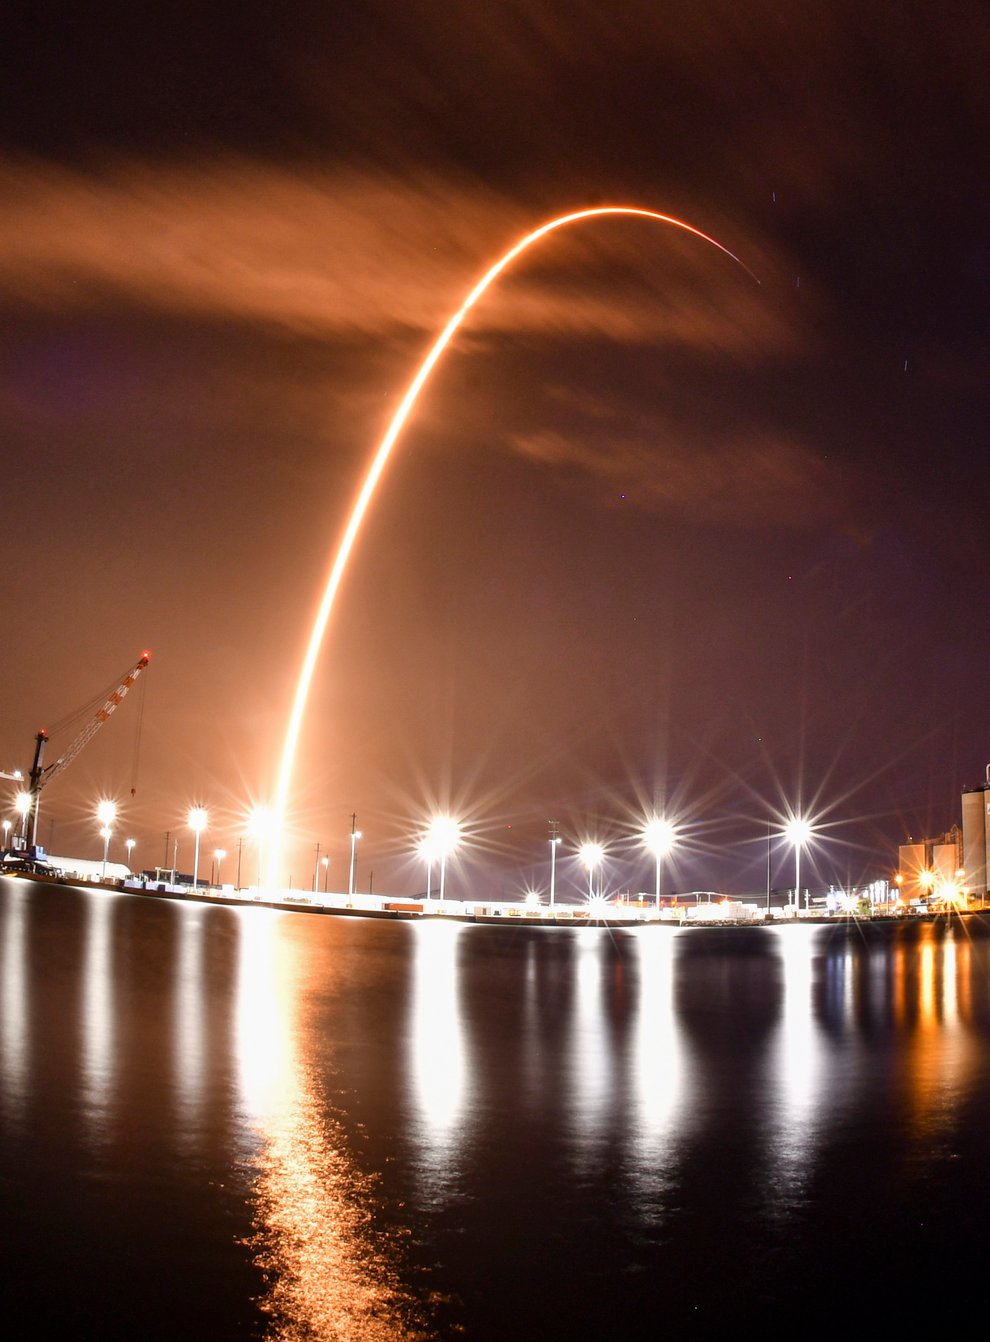 The SpaceX Falcon 9 rocket launches from Cape Canaveral Space Force Station Launch Complex 40 in Florida